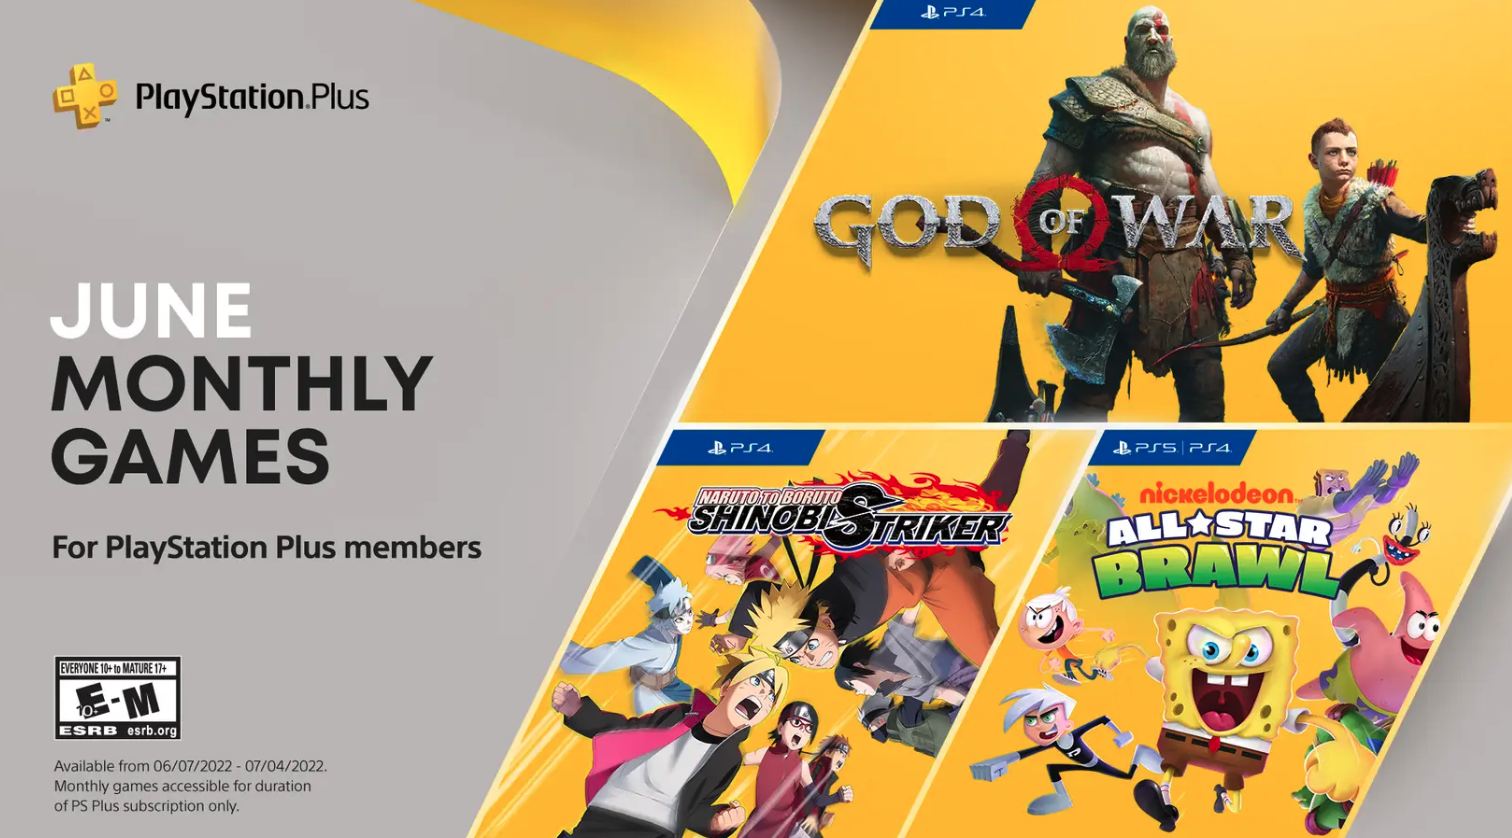 FREE PlayStation Plus games for June unveiled 9to5Toys